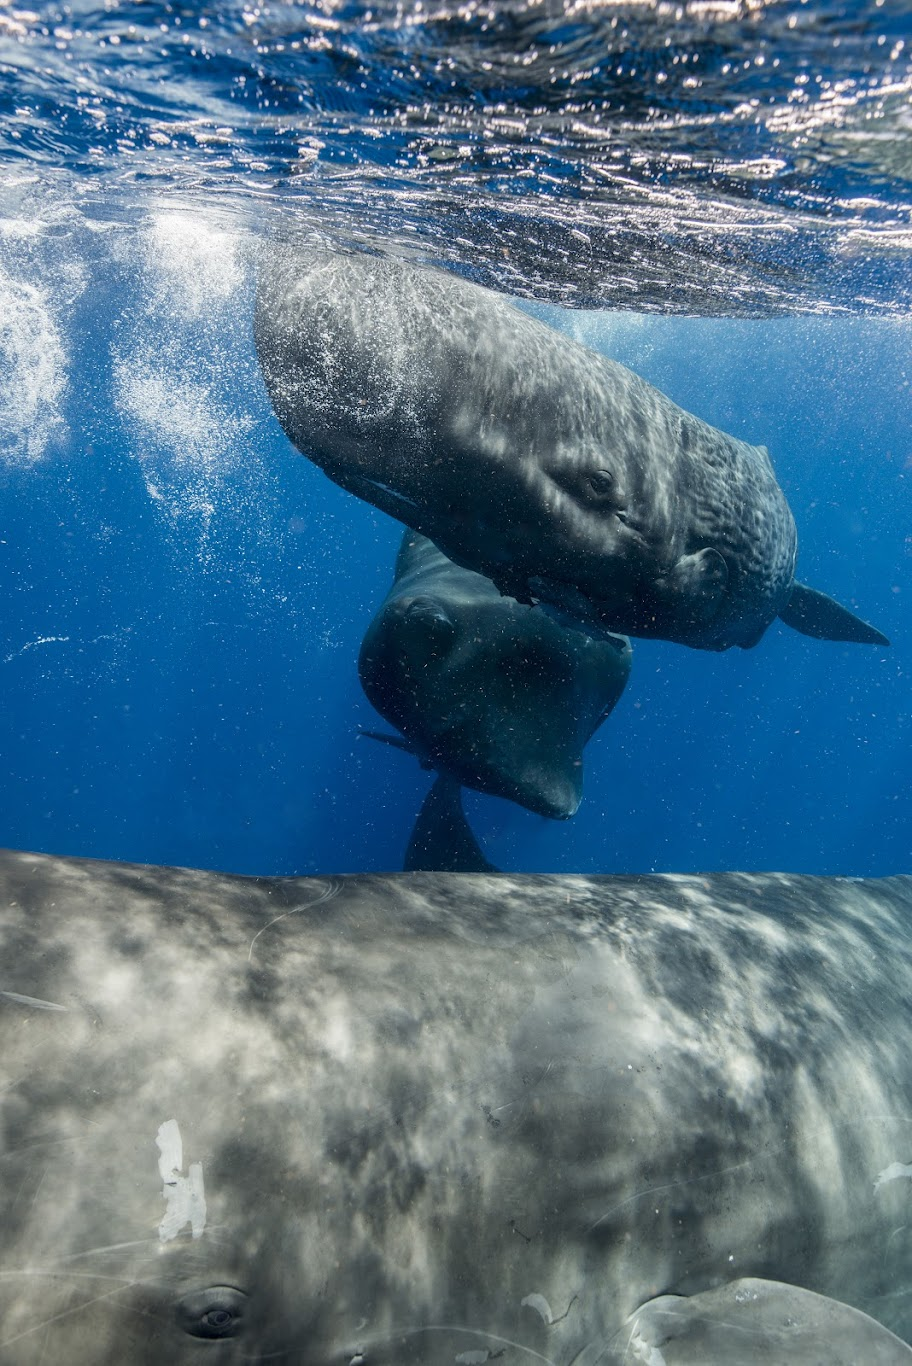 sperm whales may have their own 'alphabet'